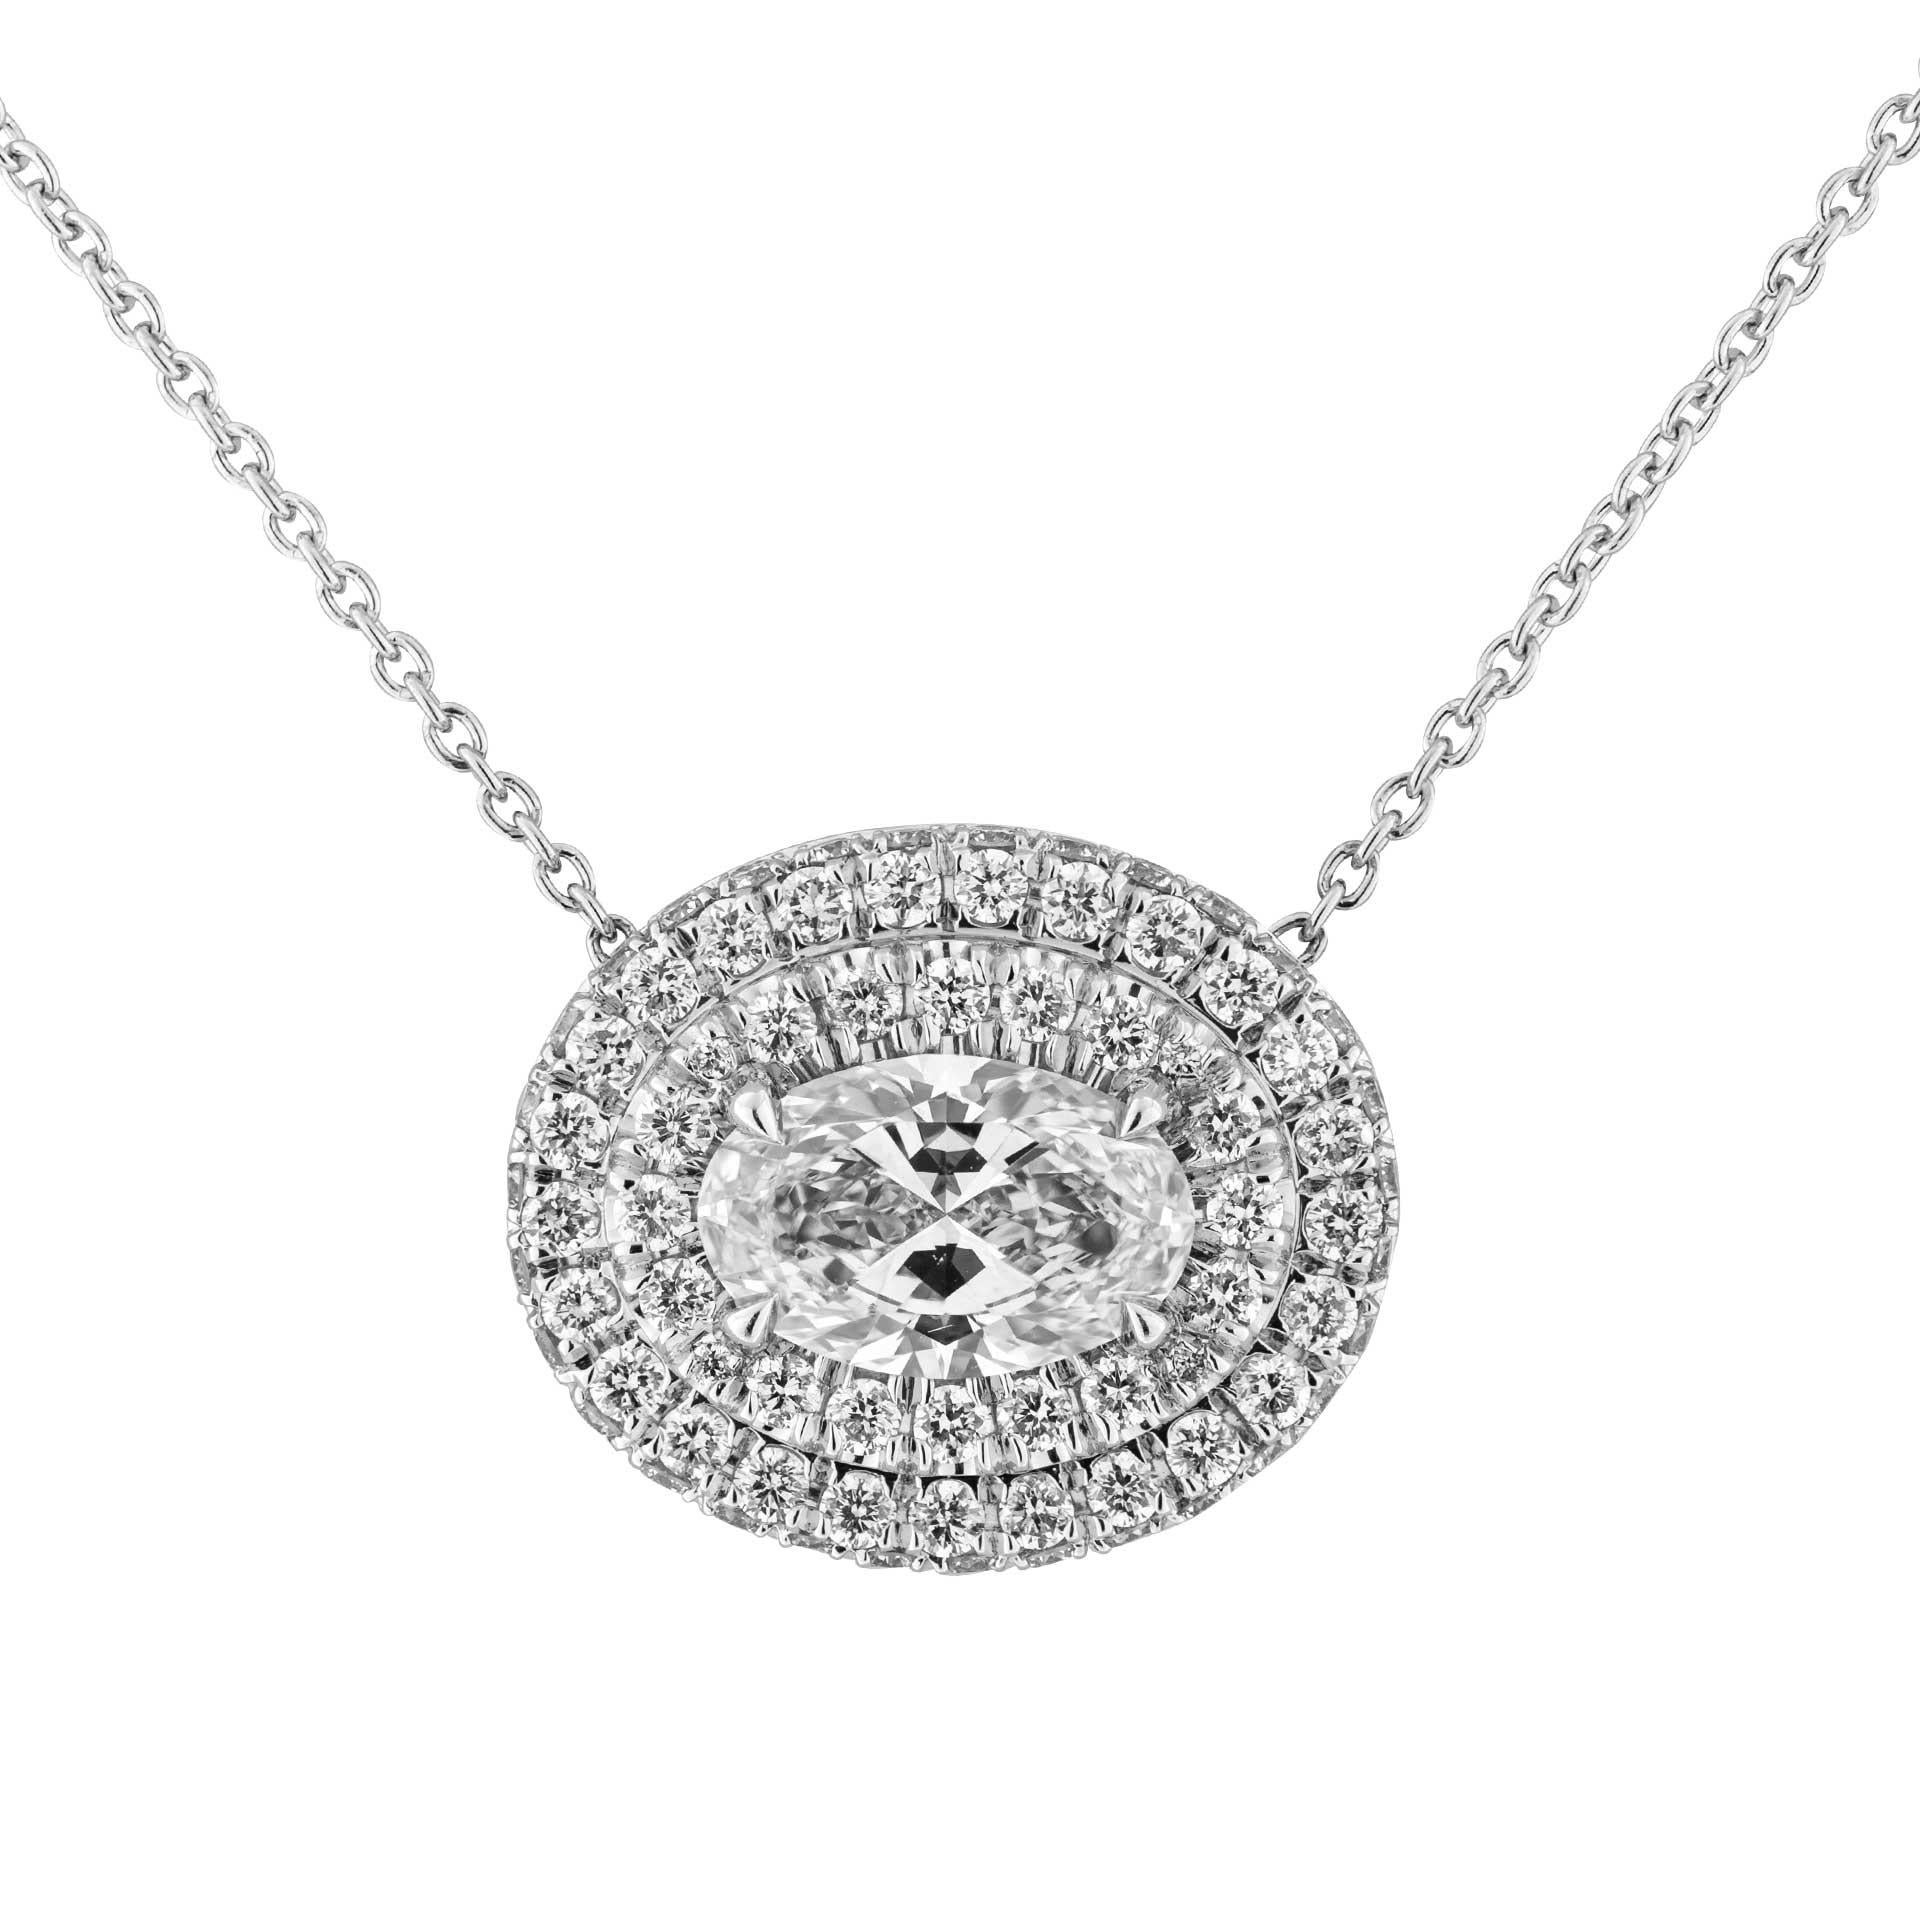 A timeless classic !
Beautiful Oval Diamond Pendant with 2 rows of white diamond halo around to highlight the beauty of the stone, totaling 0.57ct of full brilliant cut round diamonds mounted in Platinum950 

Center stone:  a 0.80ct G VS2 Oval Shape